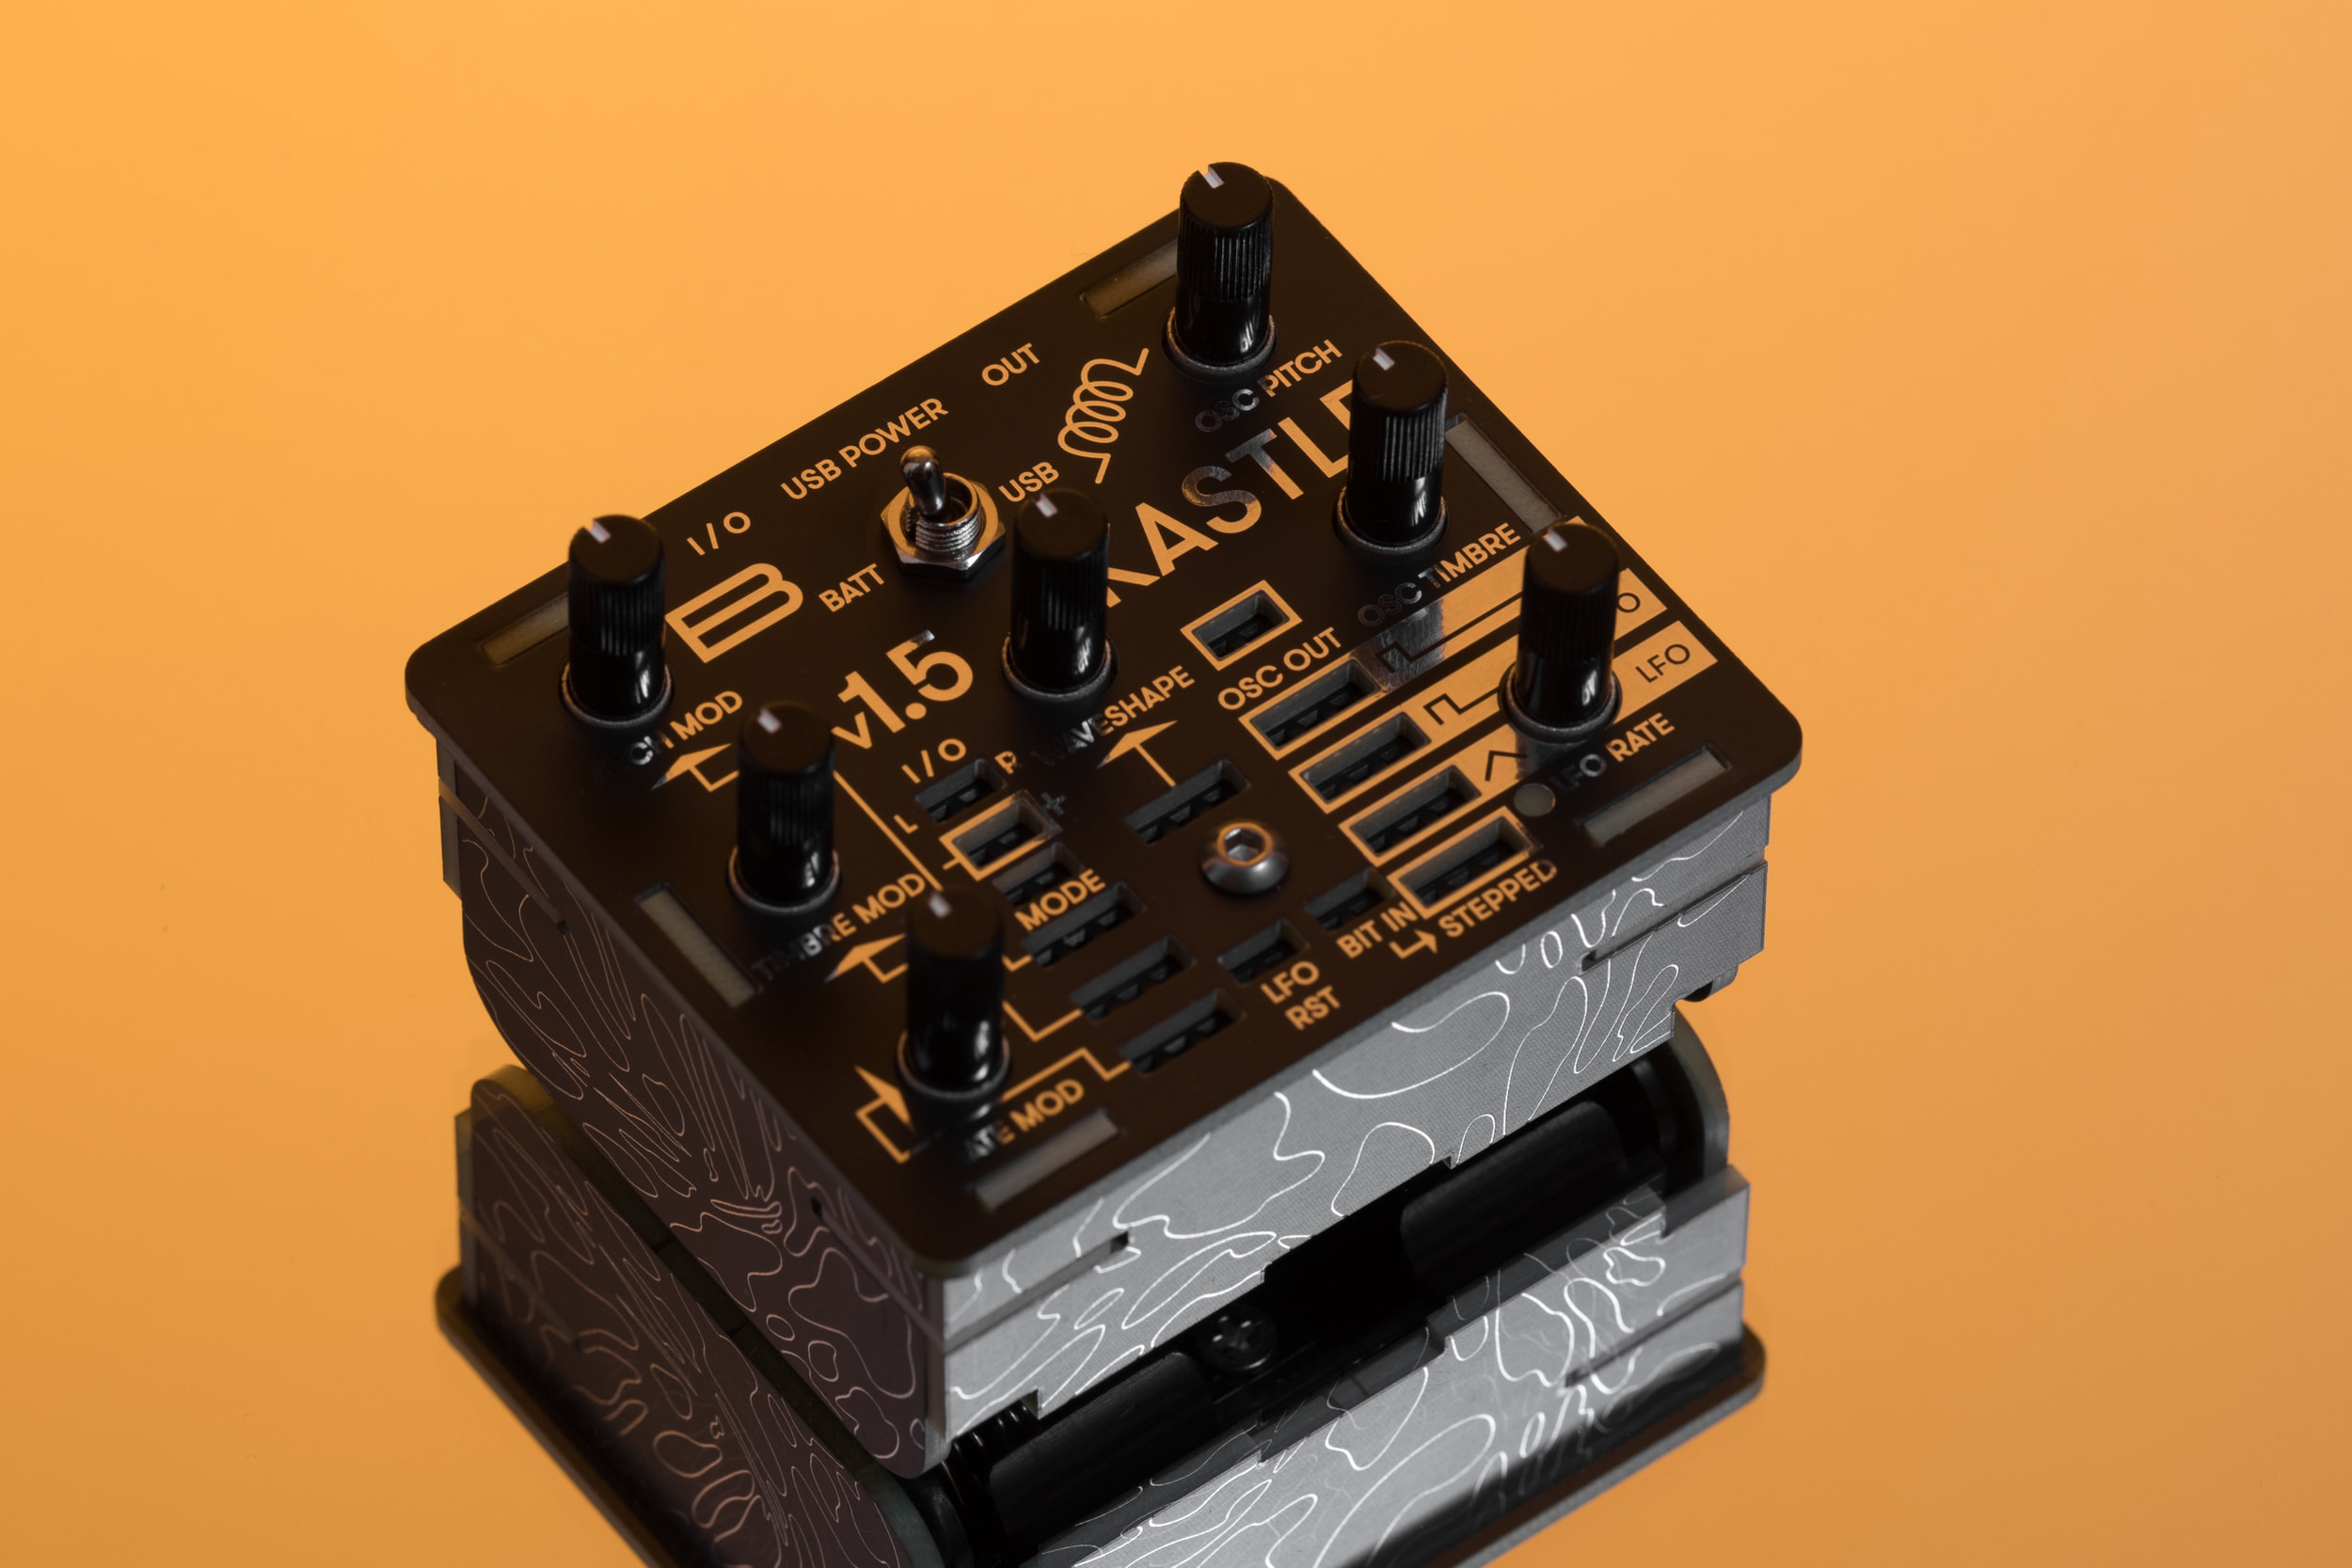 Bastl Kastle v1.5 – Experiment with lo-fi anywhere with this 